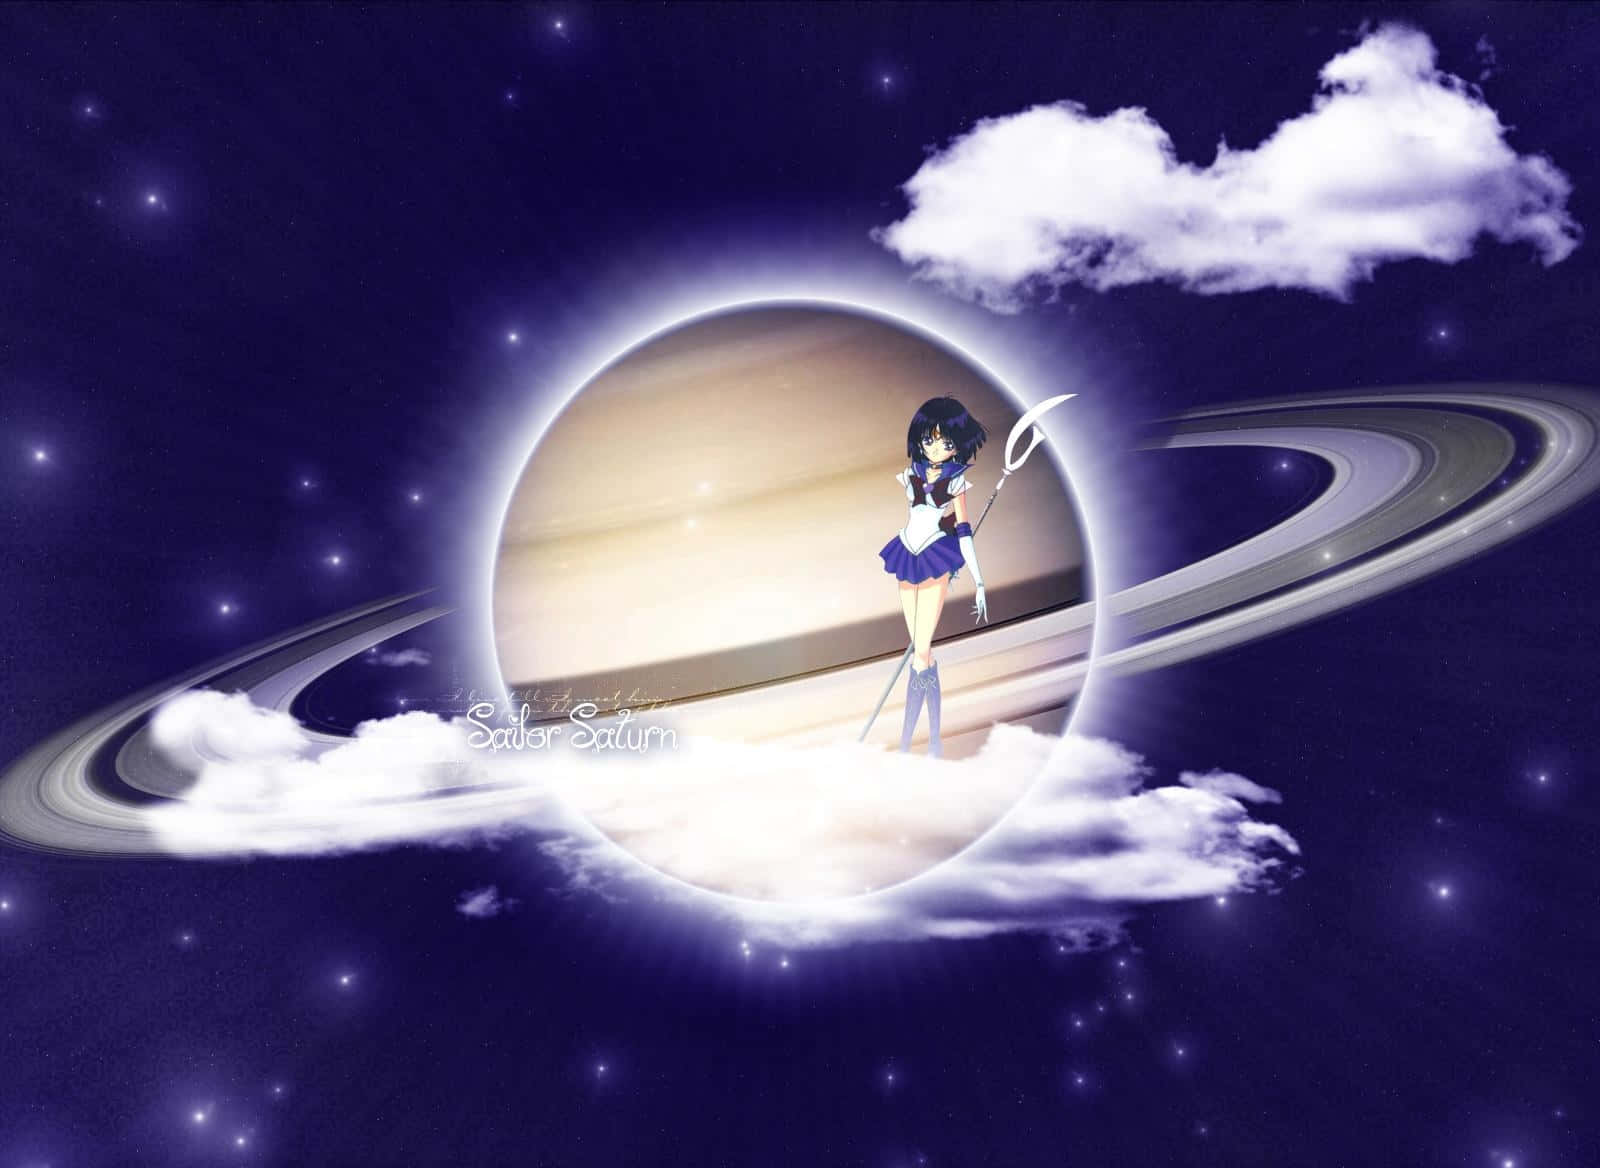 Sailor Saturn, Maiden of Destruction, stands ready to unleash her awesome power Wallpaper